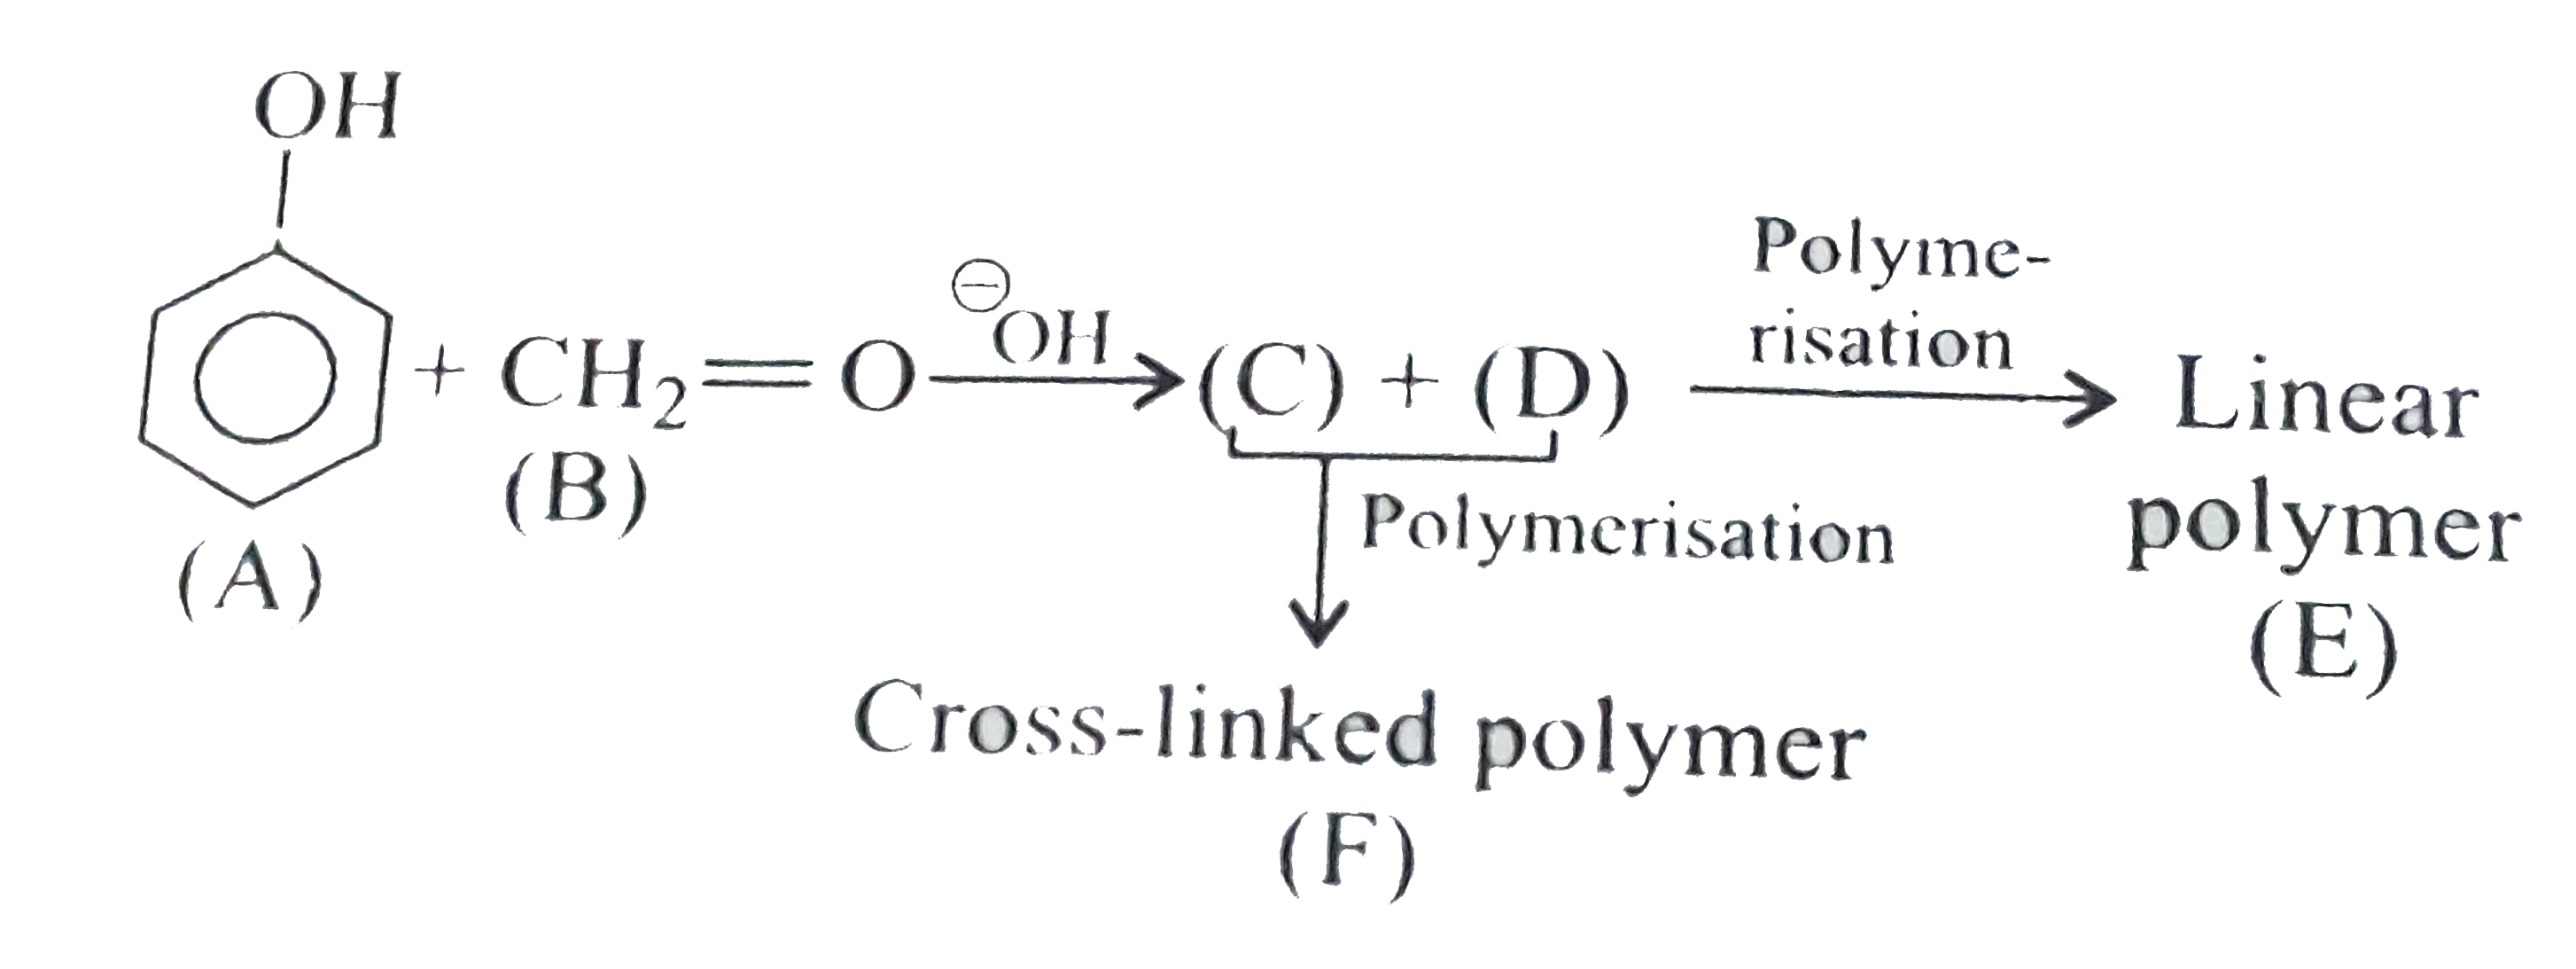 Which of th following statement is/are correct about the polymer(E)?